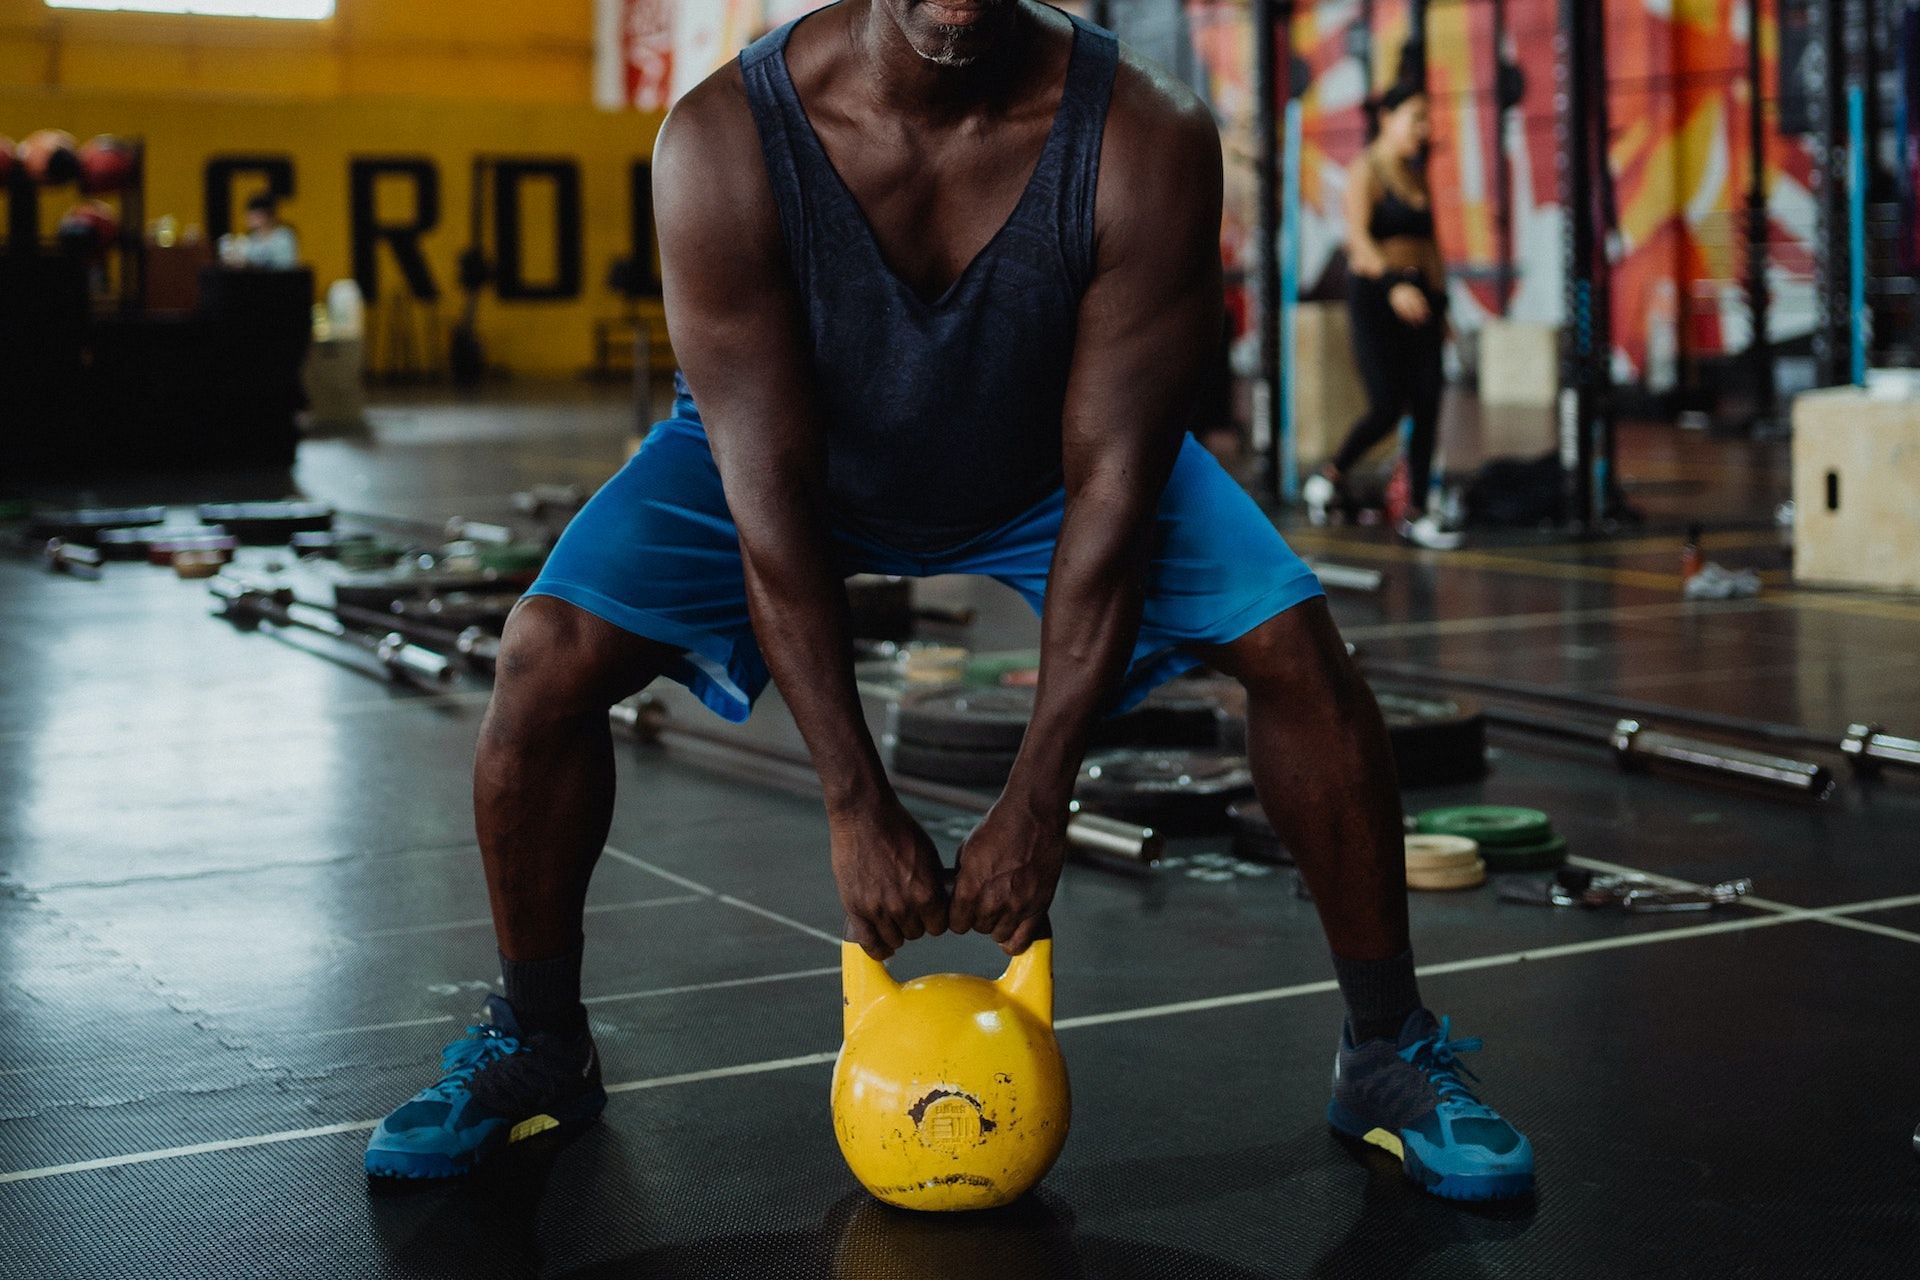 Goblet squat is a great lower body kettlebell exercise. (Photo via Pexels/Ketut Subiyanto)